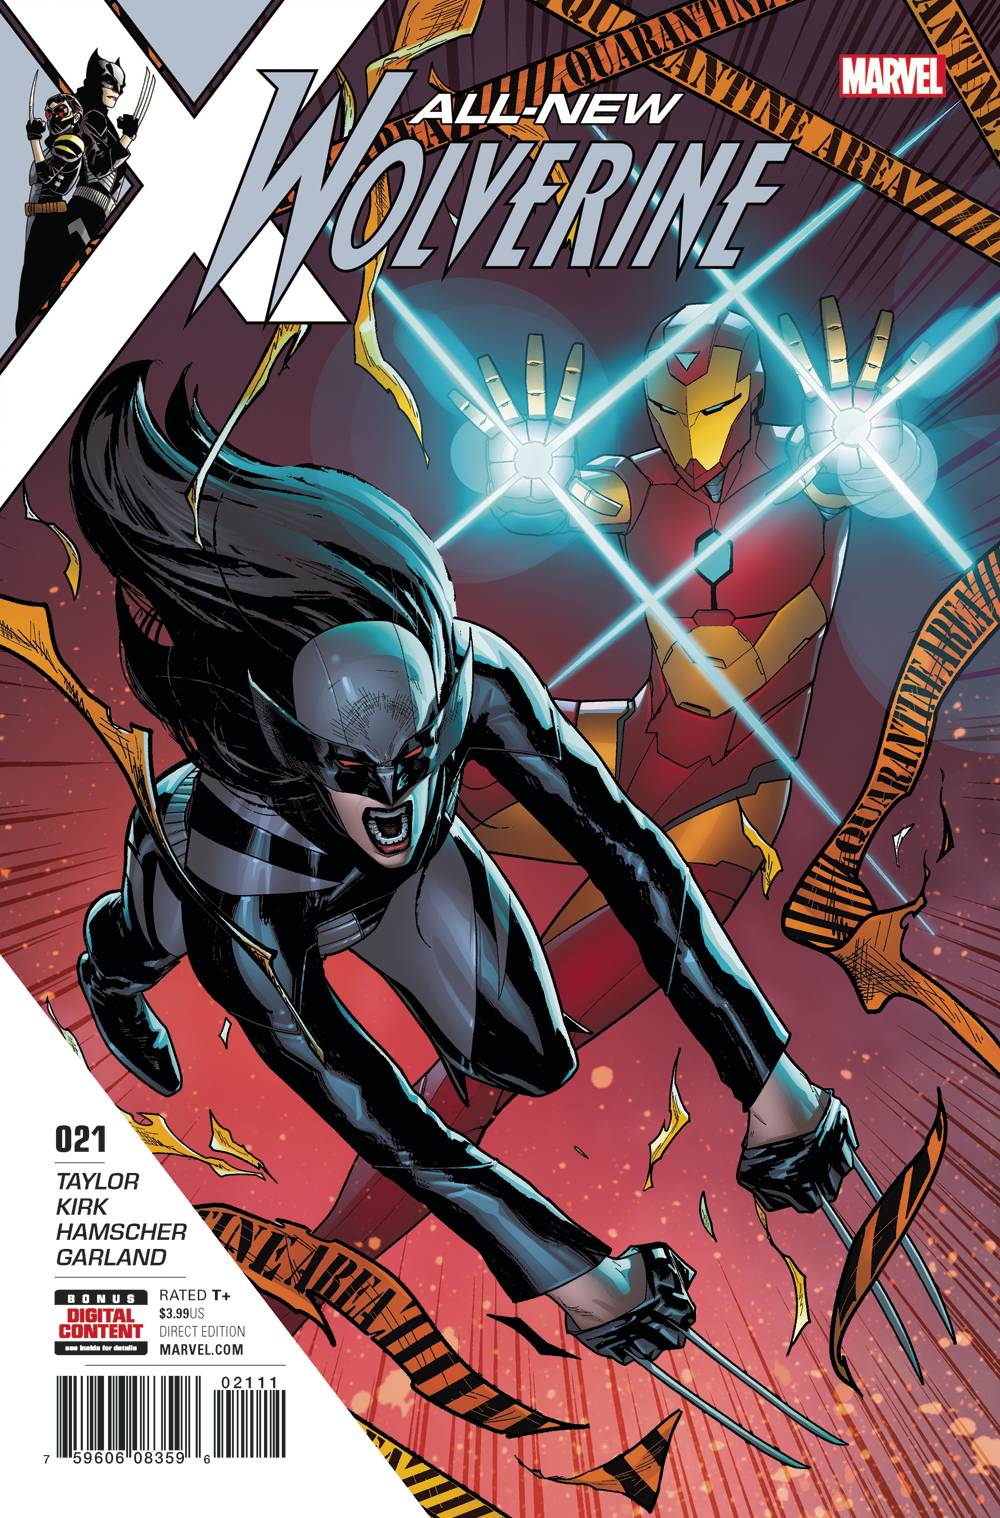 All New Wolverine #21 (2015)